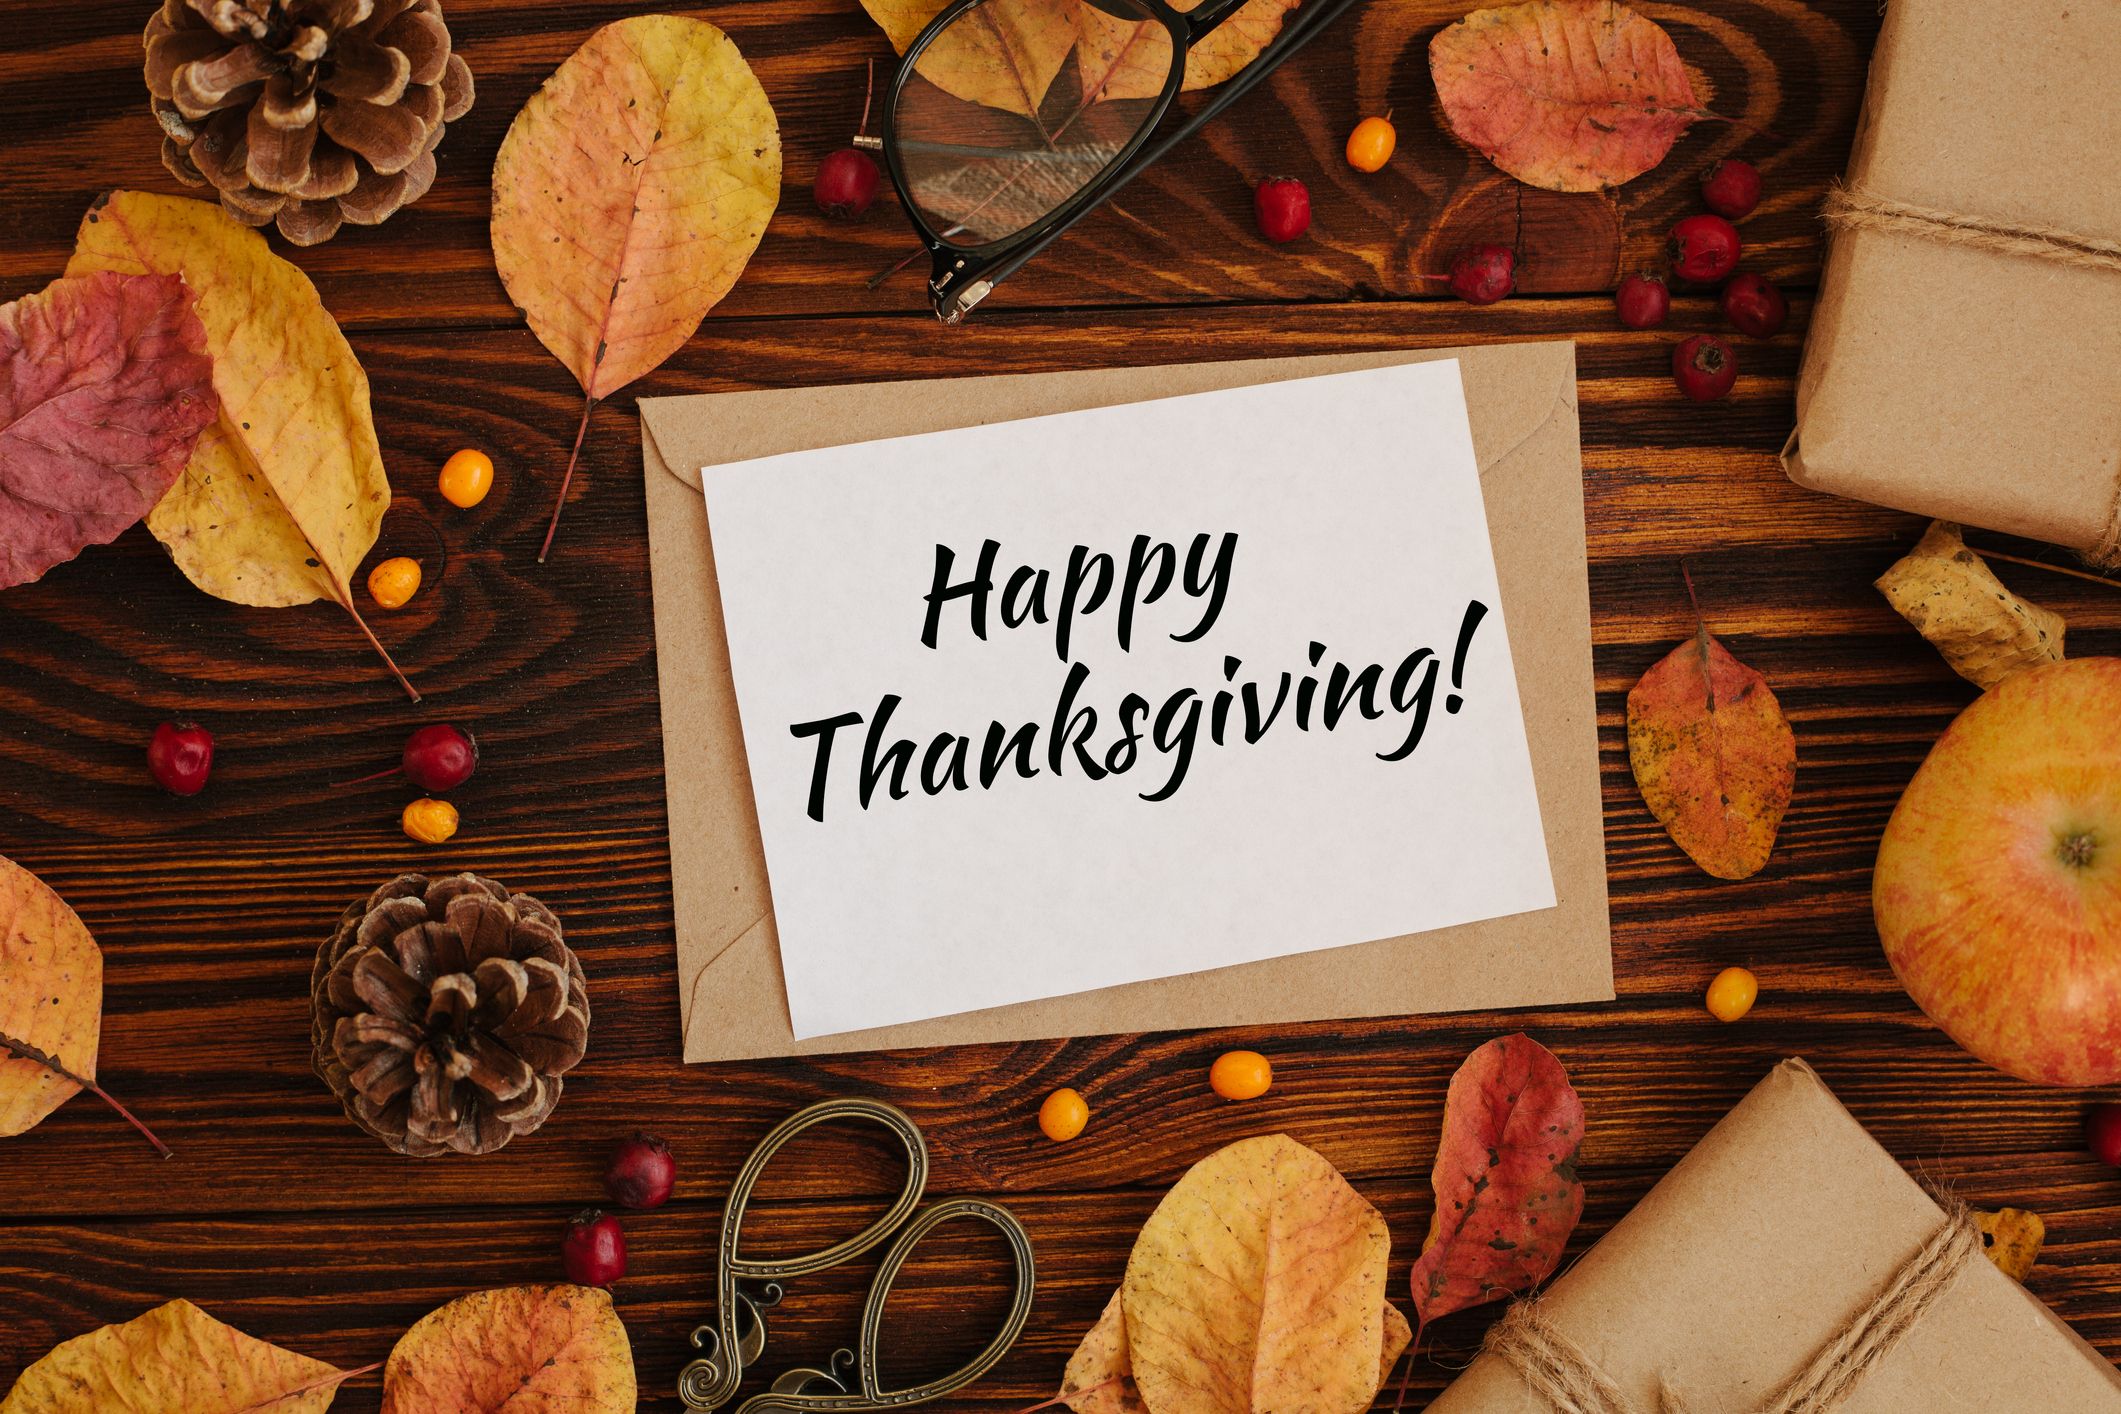 56 Best Thanksgiving Wishes and Greetings to Send Friends & Family